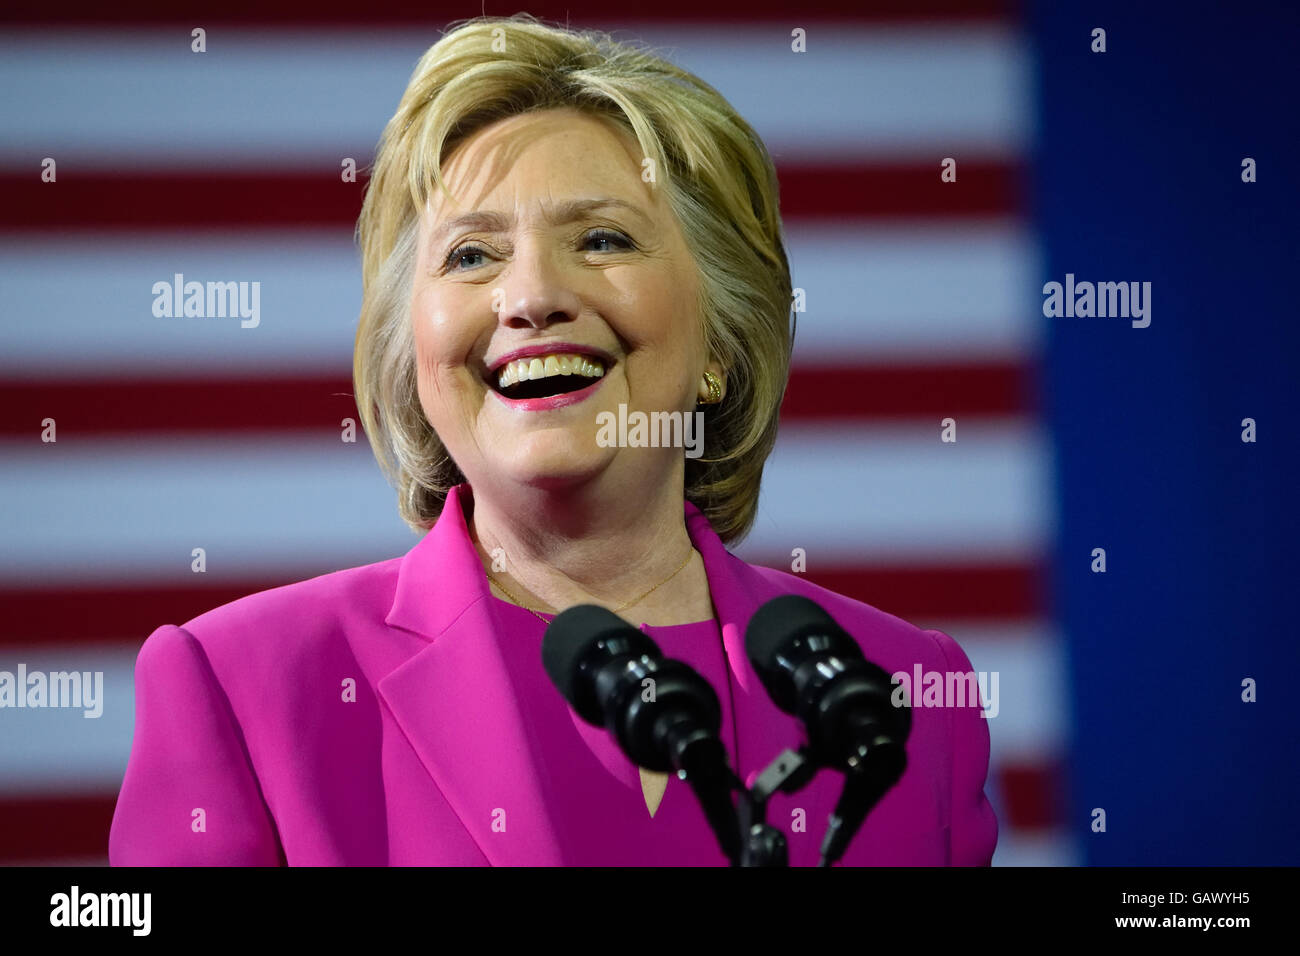 Charlotte, NC, USA. 5th July, 2016. A portrait of US Democratic presumptive presidential nominee, Hillary Clinton, smiling as she delivers a speech at a campaign rally at the Charlotte Convention Center. Credit:  Evan El-Amin/Alamy Live News Stock Photo